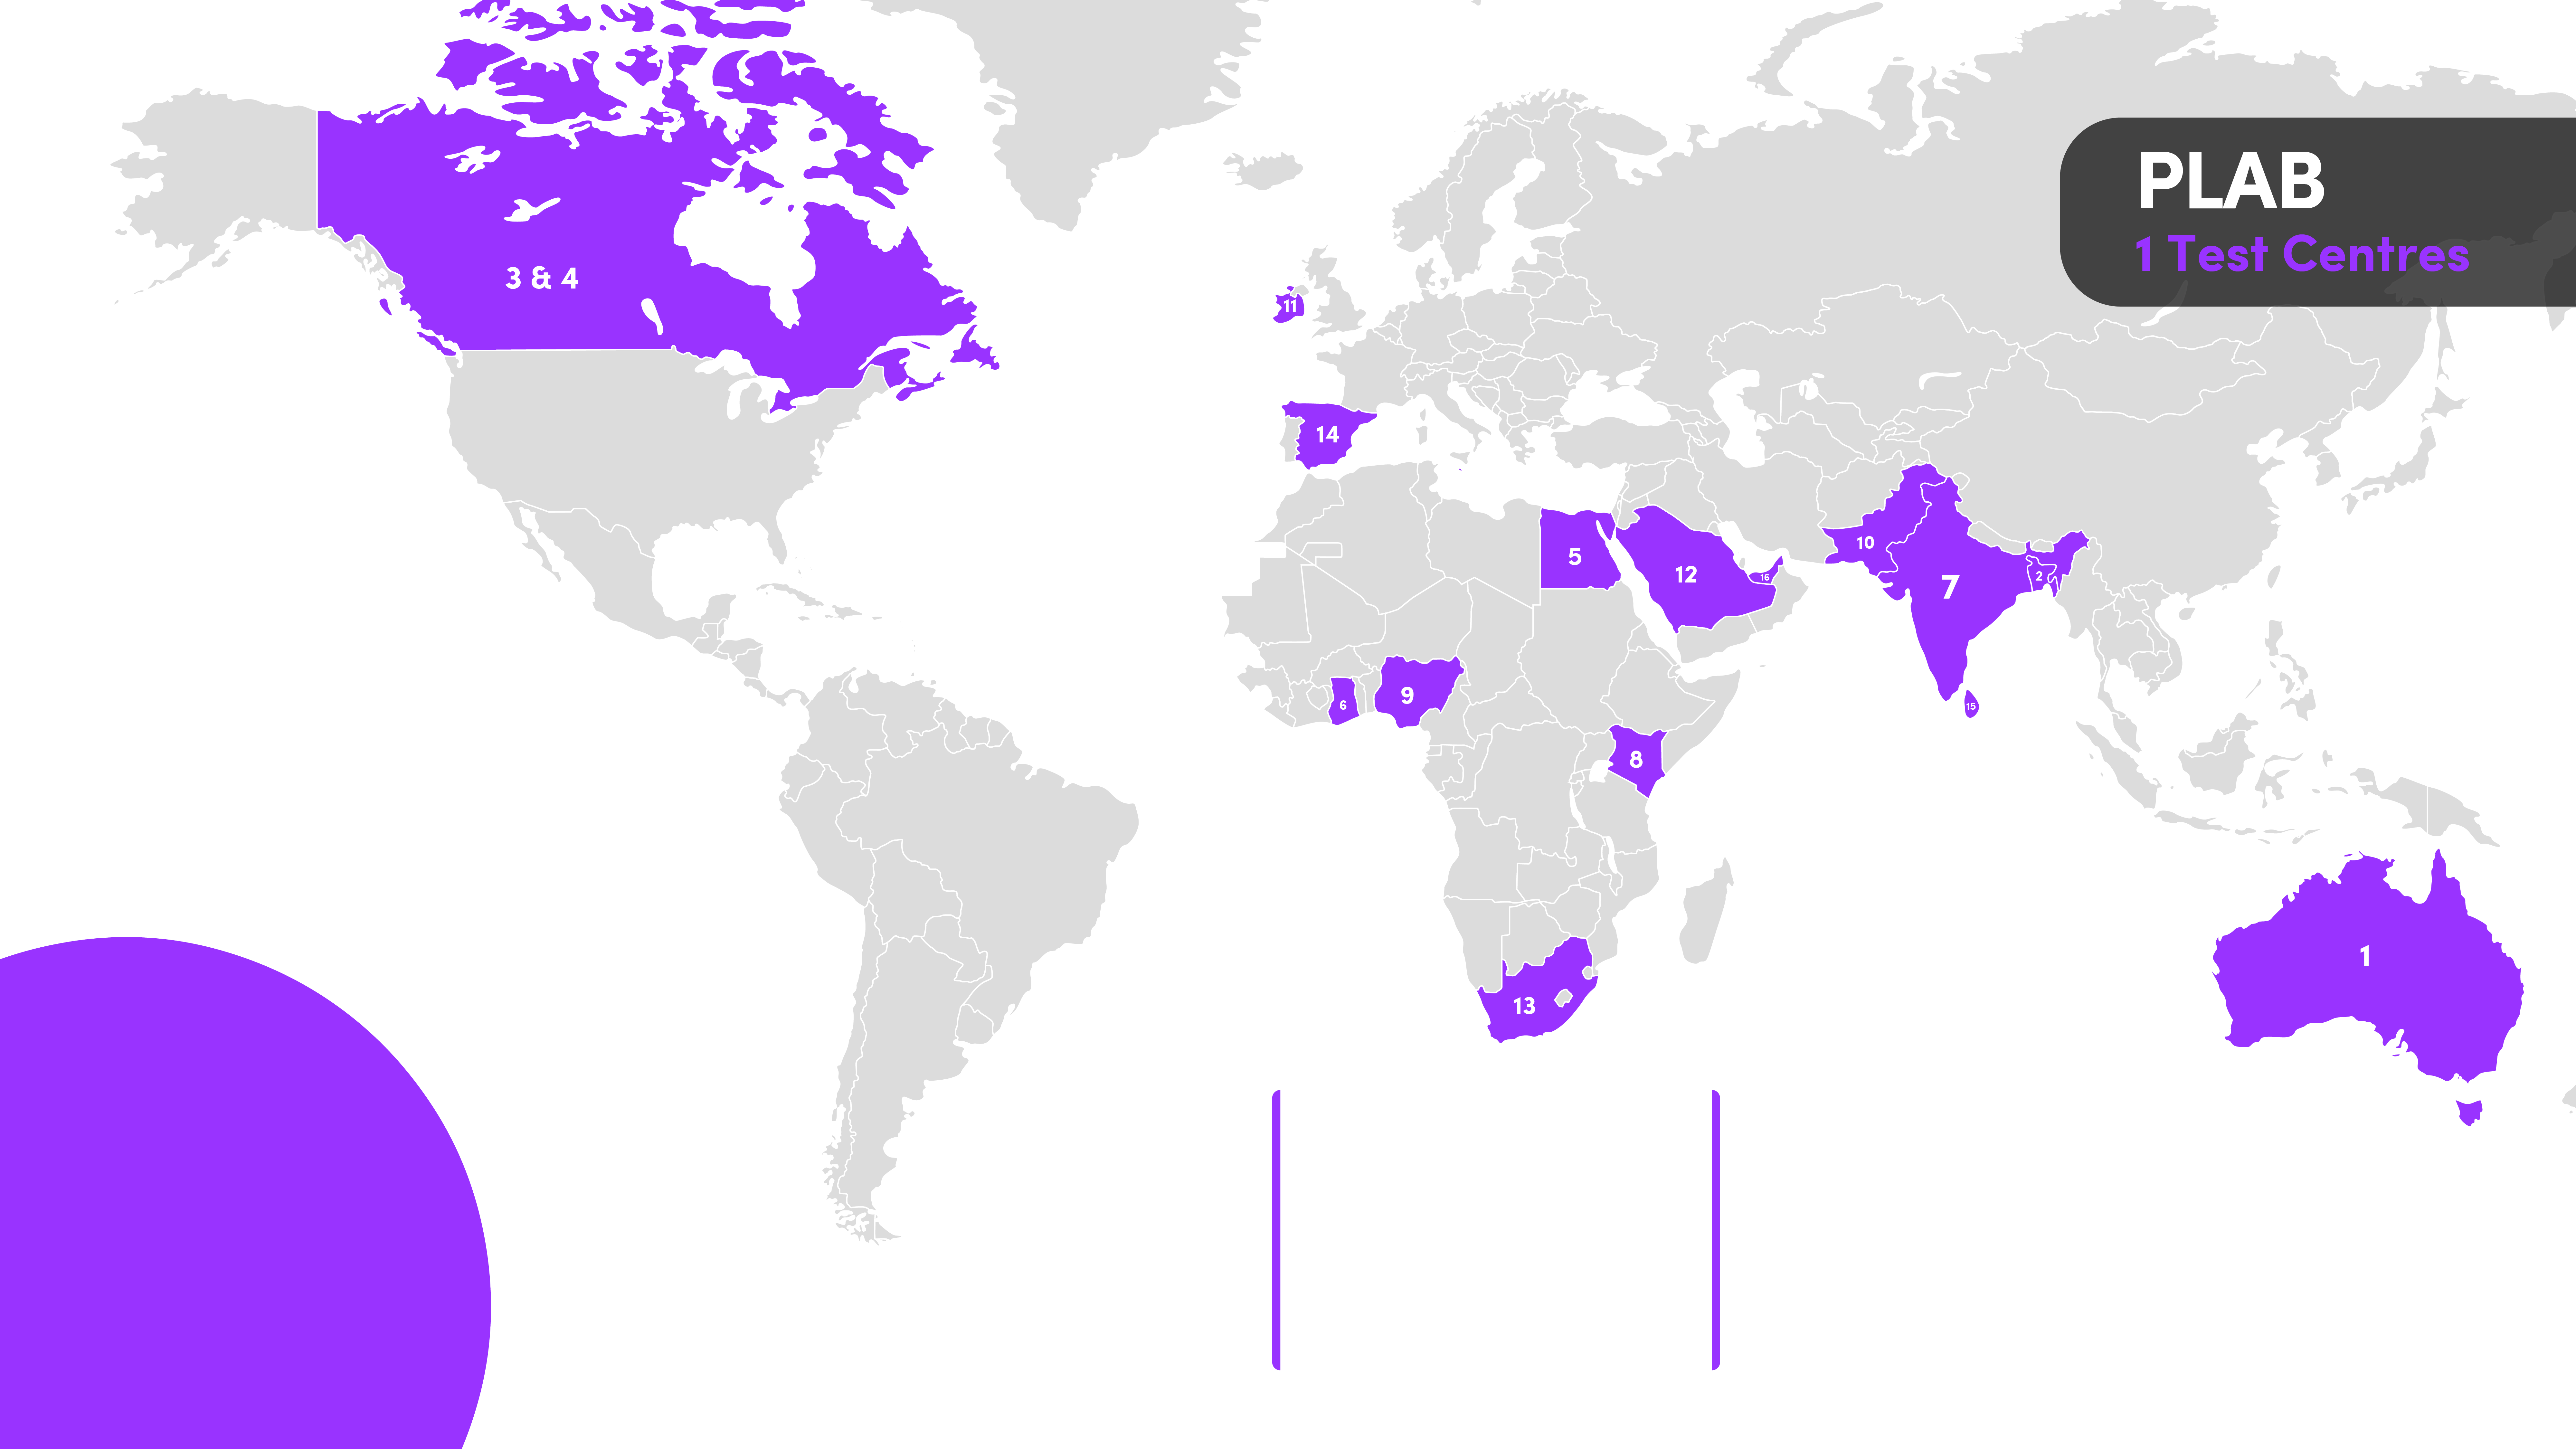 World map showing the locations of the international PLAB test centres